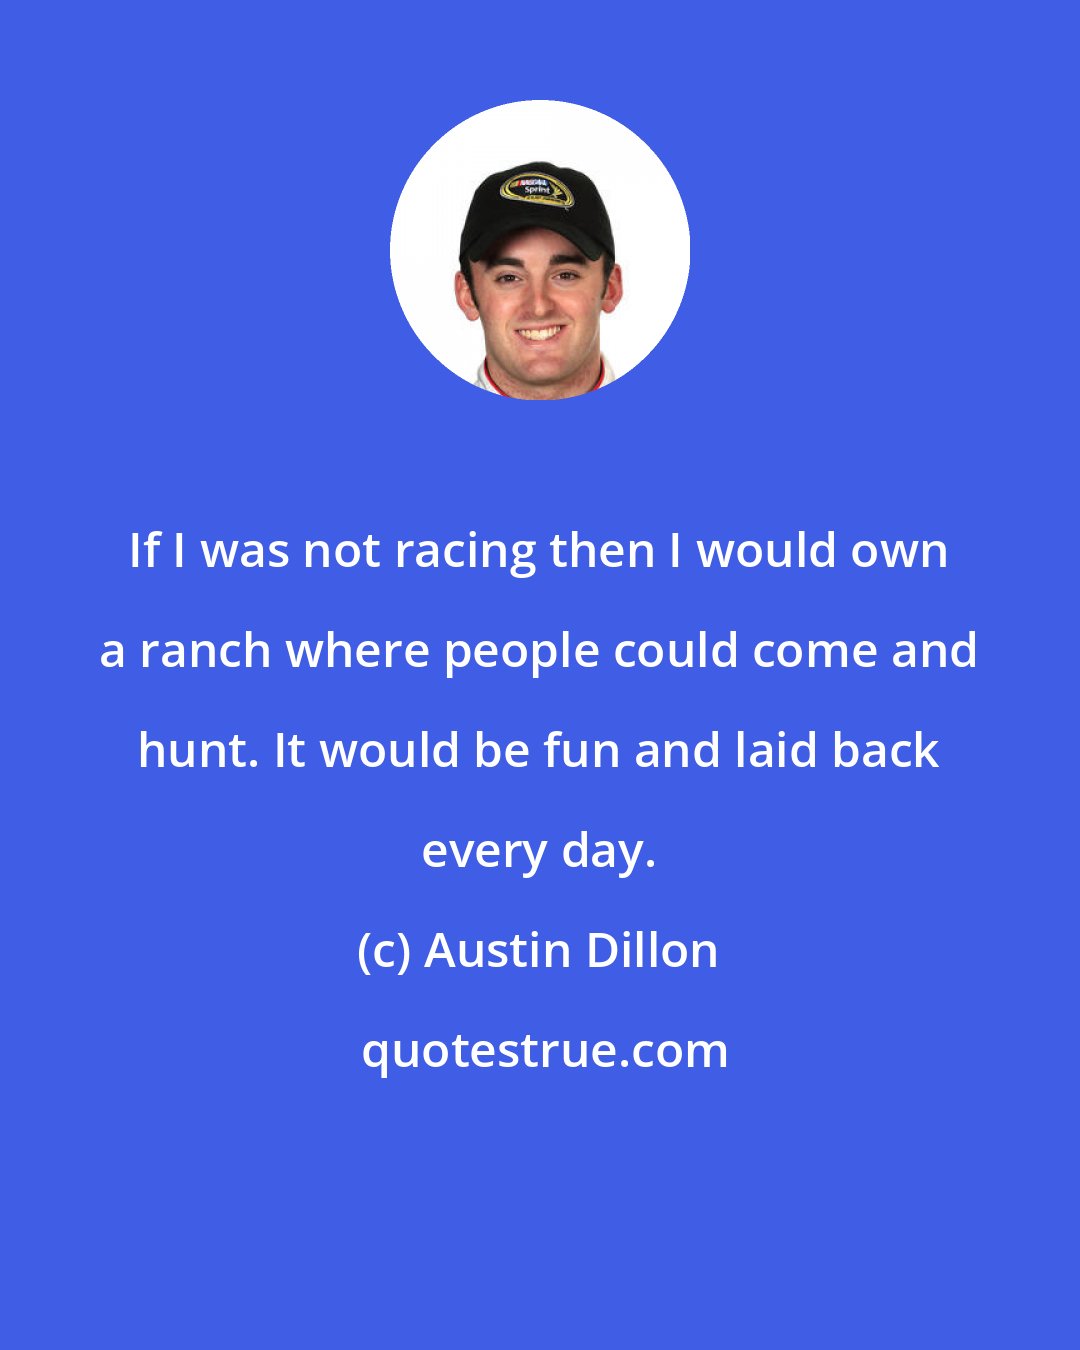 Austin Dillon: If I was not racing then I would own a ranch where people could come and hunt. It would be fun and laid back every day.